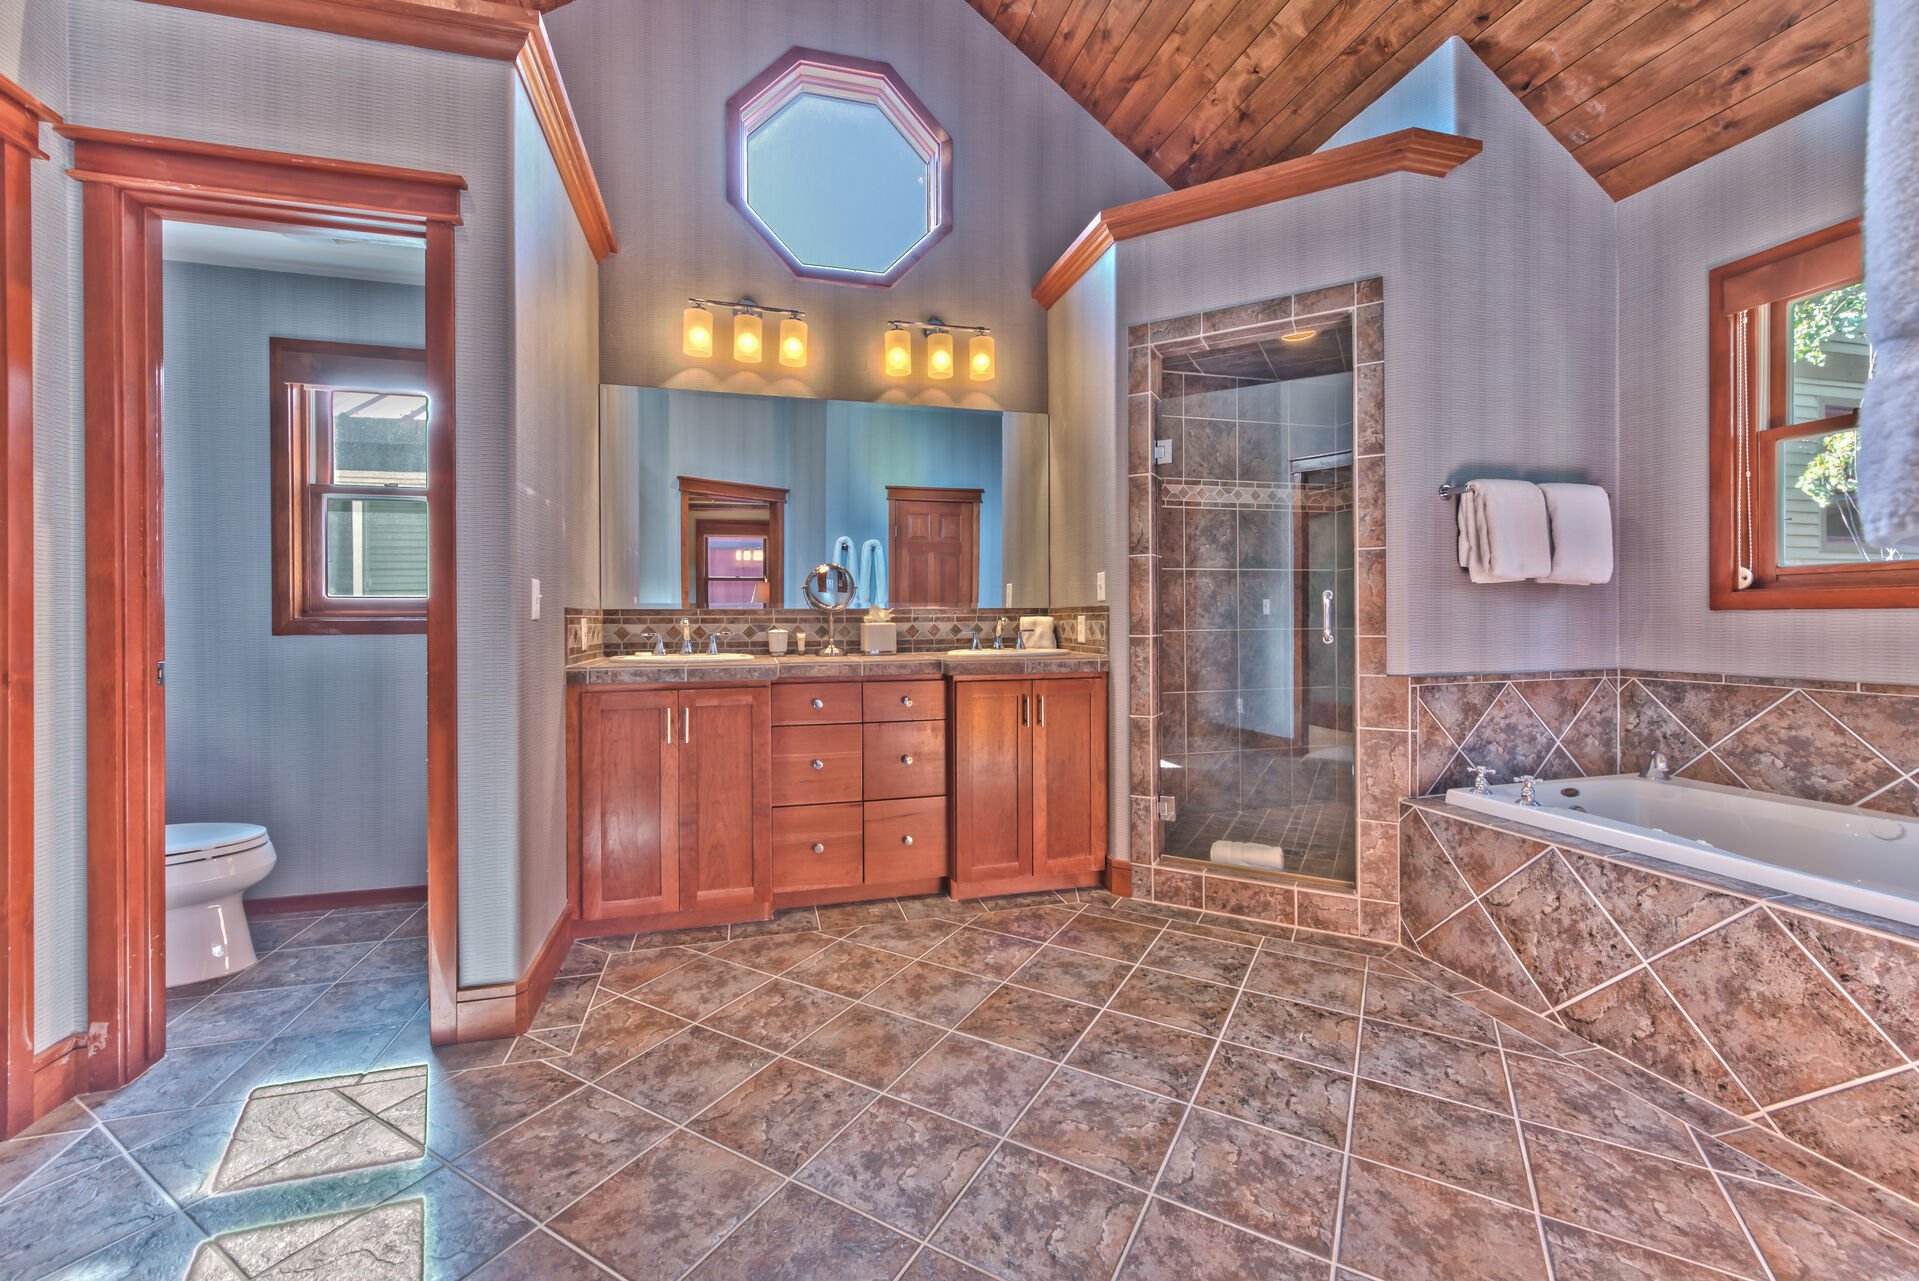 Spacious Master Bath with Dual Sinks, Jetted Tub and Large Tile Shower with Two Shower Heads